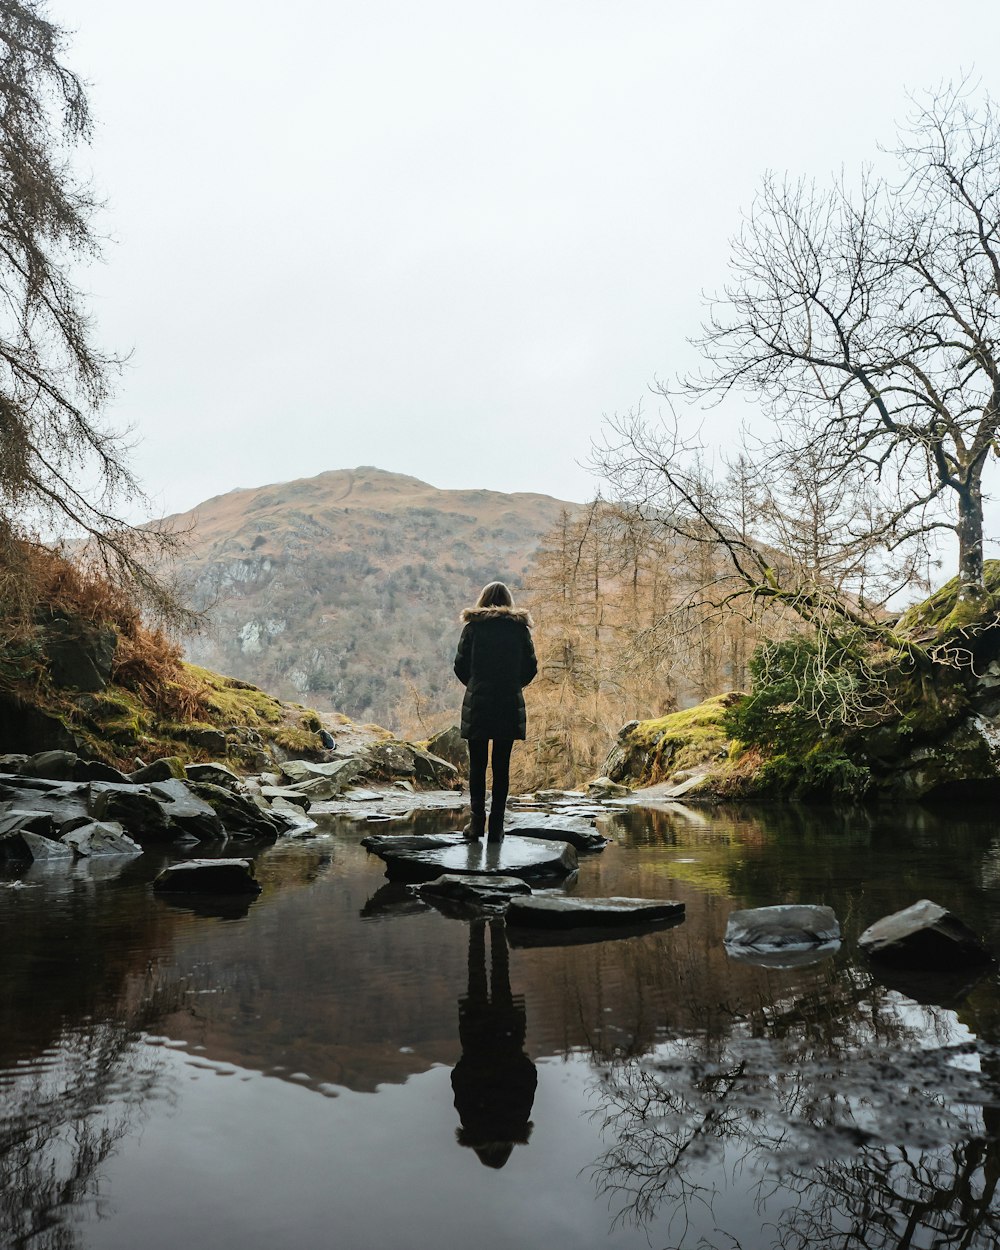 a person standing on a rock in the middle of a river